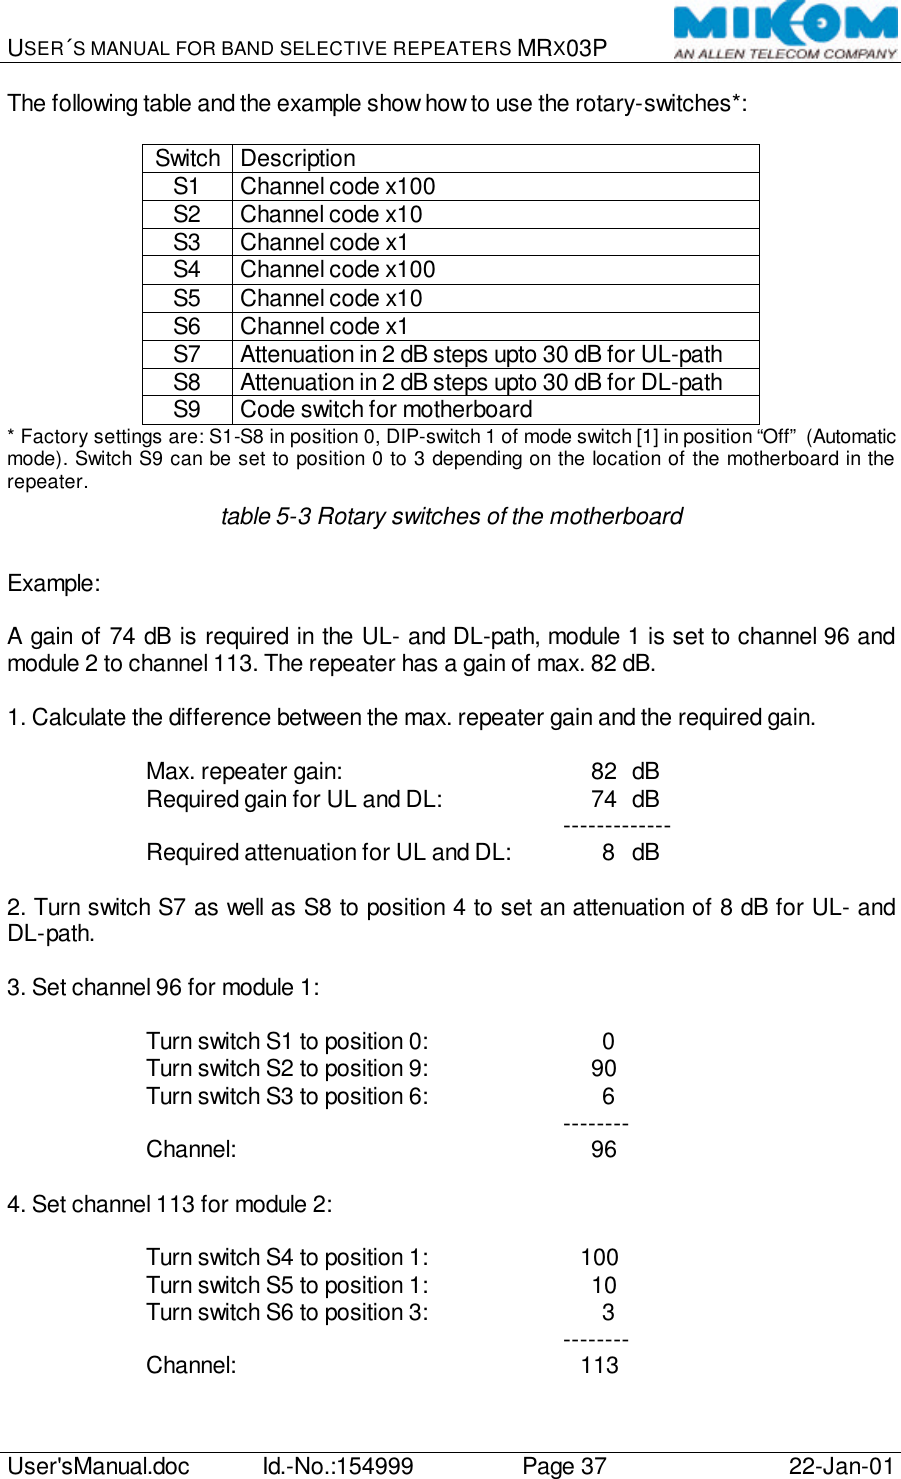 USER´S MANUAL FOR BAND SELECTIVE REPEATERS MRX03P   User&apos;sManual.doc Id.-No.:154999 Page 37 22-Jan-01  The following table and the example show how to use the rotary-switches*:  Switch Description S1 Channel code x100 S2 Channel code x10 S3 Channel code x1 S4 Channel code x100 S5 Channel code x10 S6 Channel code x1 S7 Attenuation in 2 dB steps upto 30 dB for UL-path S8 Attenuation in 2 dB steps upto 30 dB for DL-path S9 Code switch for motherboard * Factory settings are: S1-S8 in position 0, DIP-switch 1 of mode switch [1] in position “Off” (Automatic mode). Switch S9 can be set to position 0 to 3 depending on the location of the motherboard in the repeater. table 5-3 Rotary switches of the motherboard  Example:  A gain of 74 dB is required in the UL- and DL-path, module 1 is set to channel 96 and module 2 to channel 113. The repeater has a gain of max. 82 dB.  1. Calculate the difference between the max. repeater gain and the required gain.  Max. repeater gain:             82 dB Required gain for UL and DL:         74 dB    ------------- Required attenuation for UL and DL:        8 dB  2. Turn switch S7 as well as S8 to position 4 to set an attenuation of 8 dB for UL- and DL-path.  3. Set channel 96 for module 1:  Turn switch S1 to position 0:           0 Turn switch S2 to position 9:         90 Turn switch S3 to position 6:           6    -------- Channel:               96  4. Set channel 113 for module 2:  Turn switch S4 to position 1:       100 Turn switch S5 to position 1:         10 Turn switch S6 to position 3:           3    -------- Channel:             113 